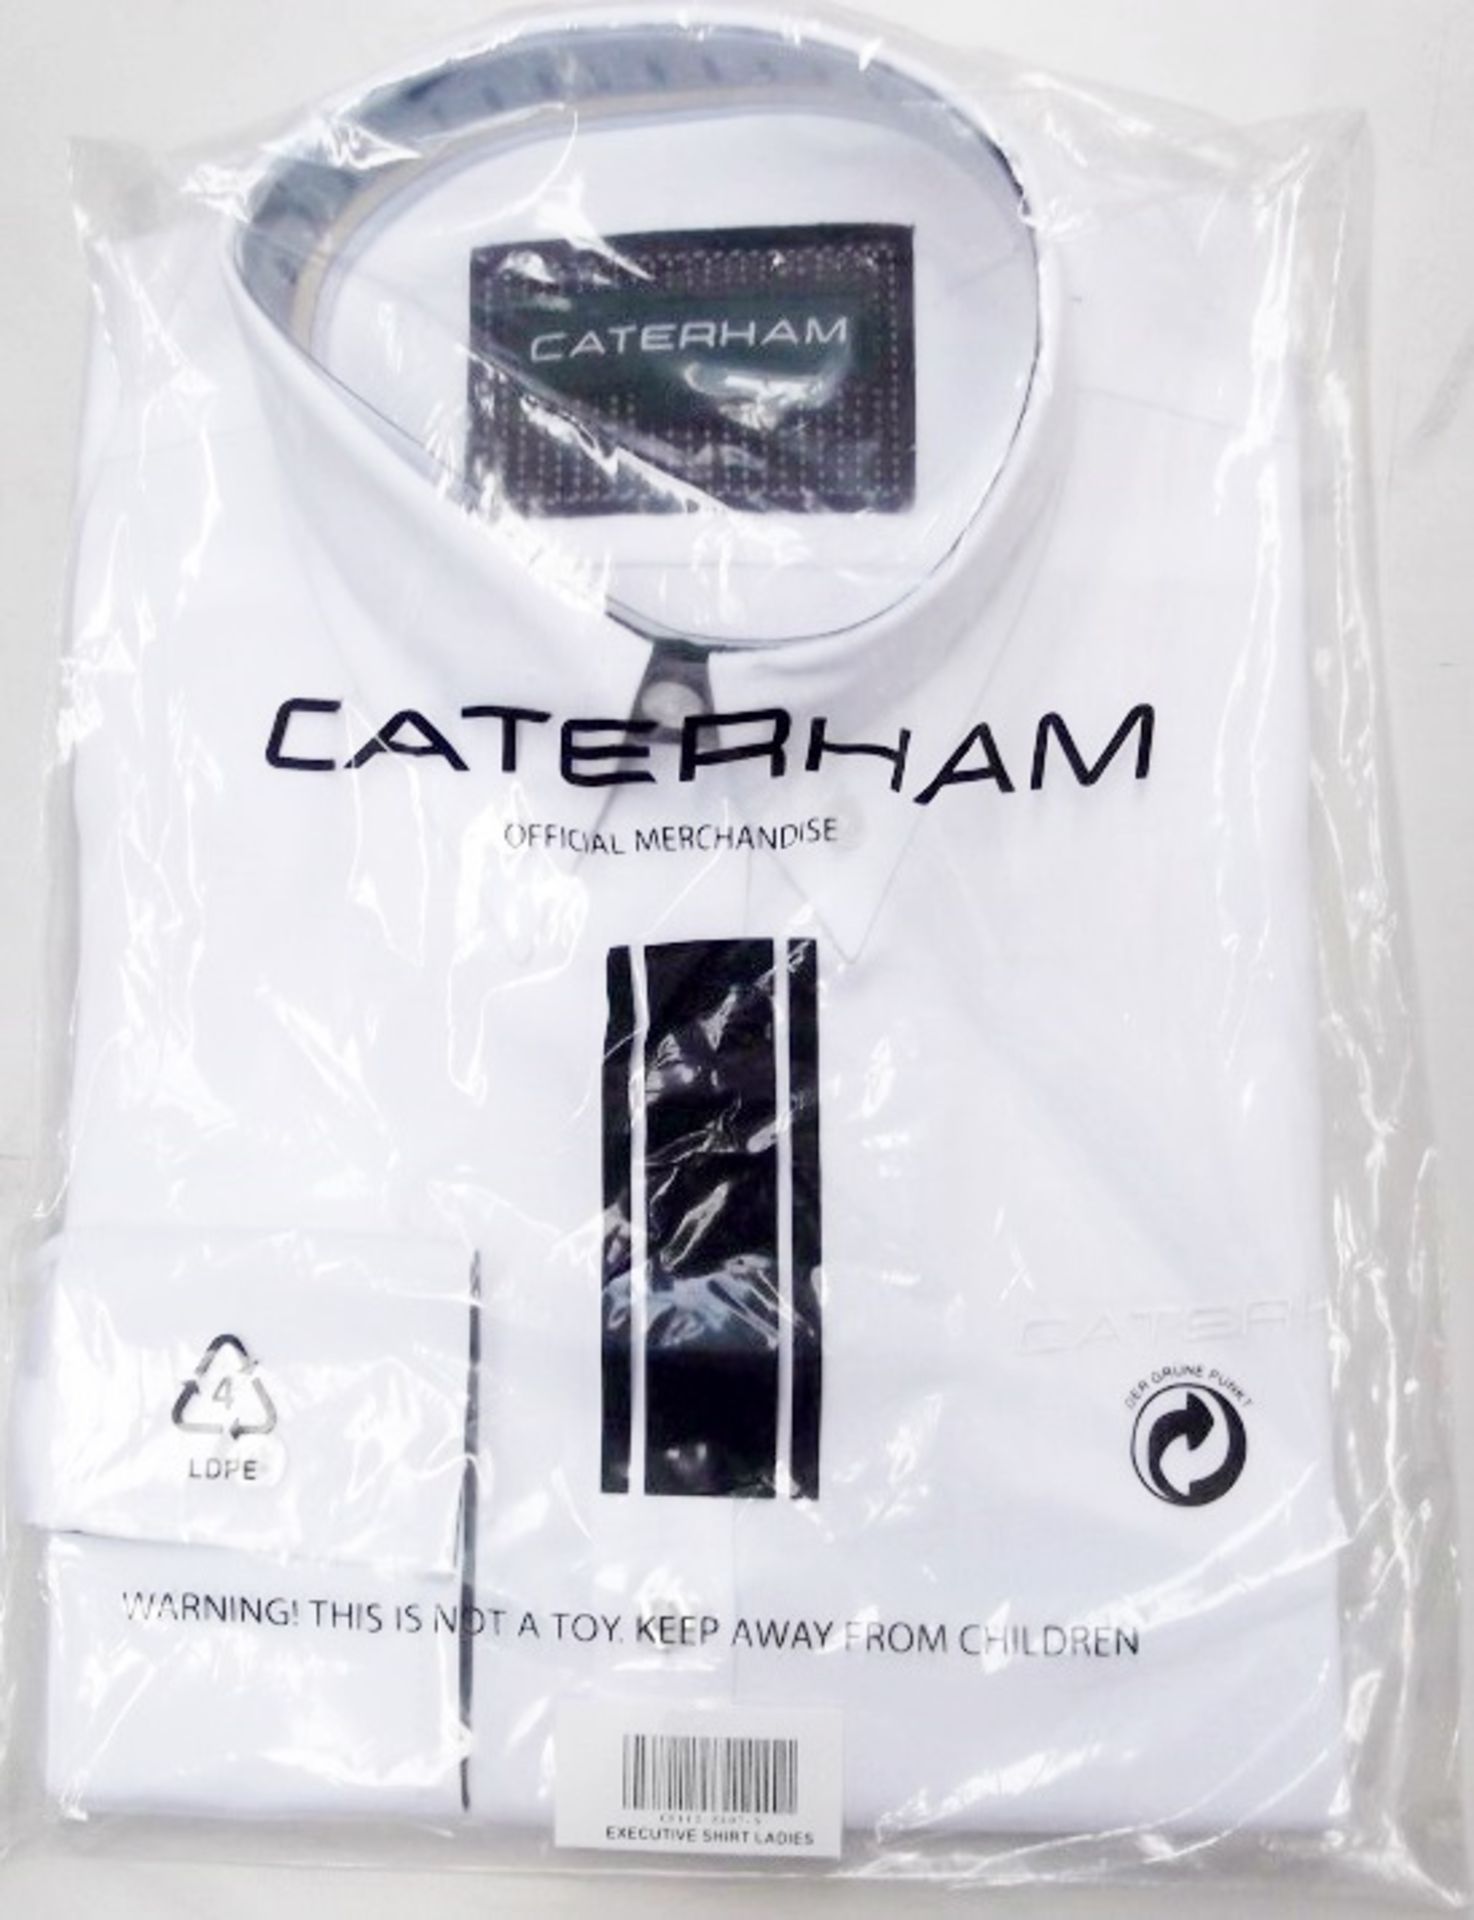 4 x Ladies CATERHAM F1 Race Team Executive Shirts - Size: XXXL - NEW WITH TAGS - CL155 - Ref: JIM095